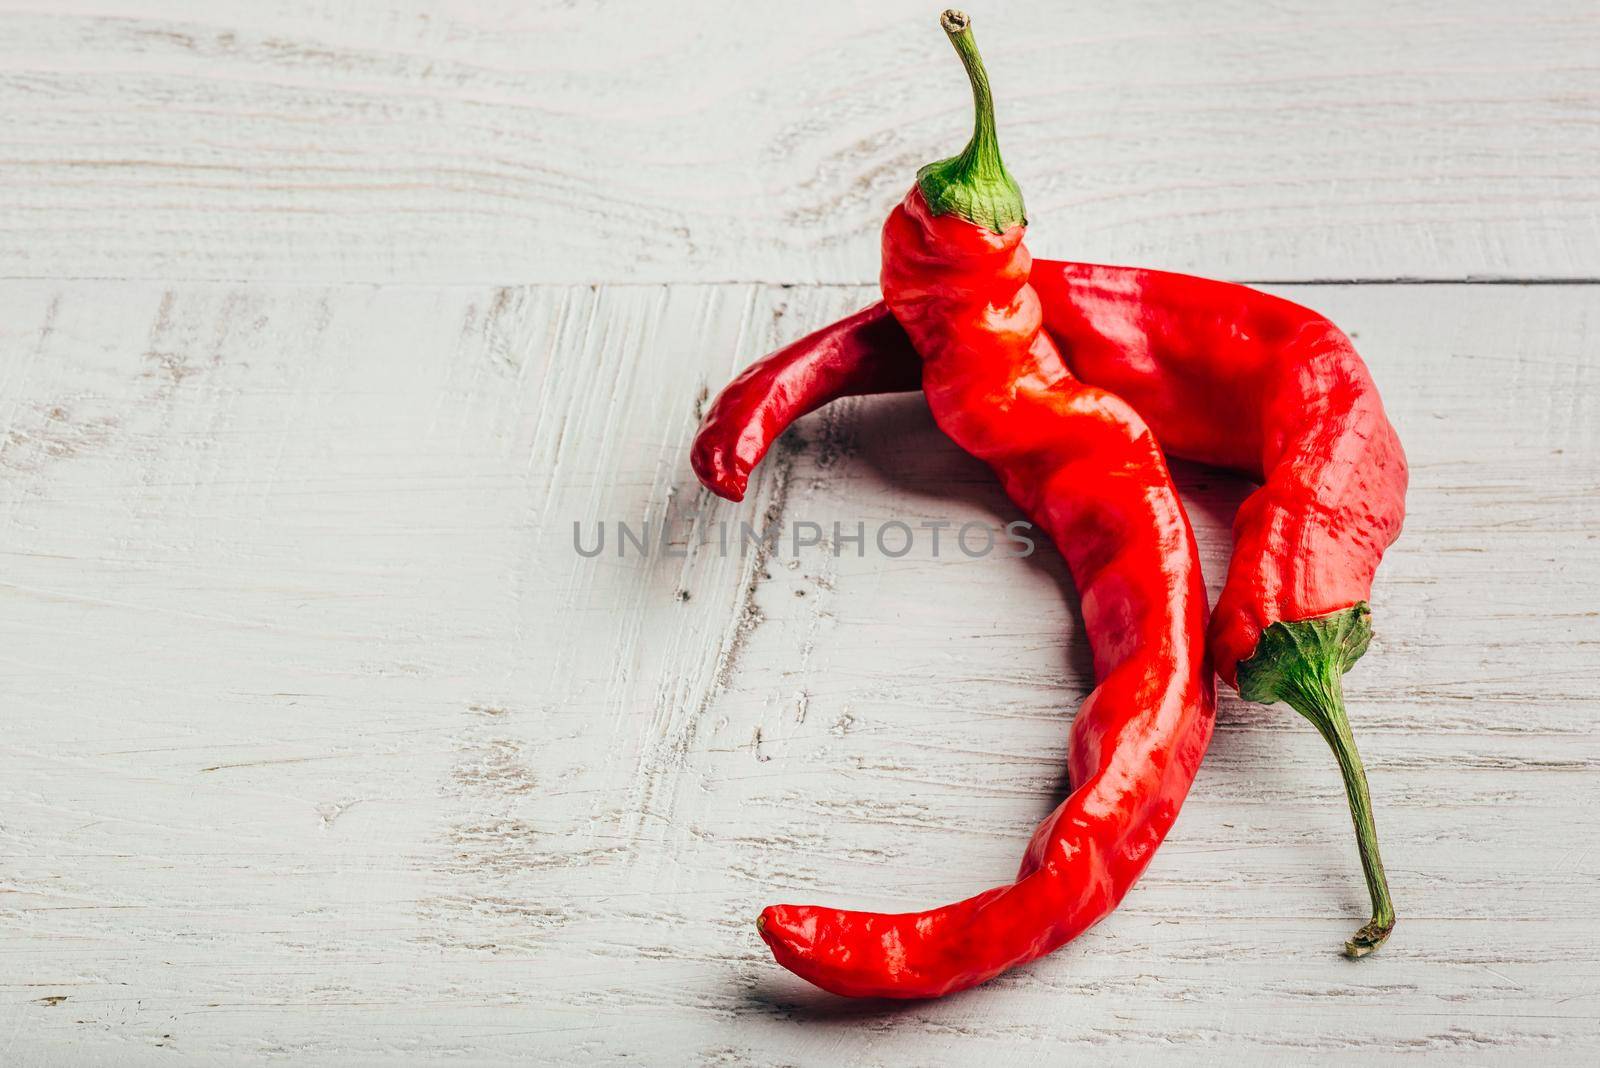 Red chili peppers on wooden background. by Seva_blsv